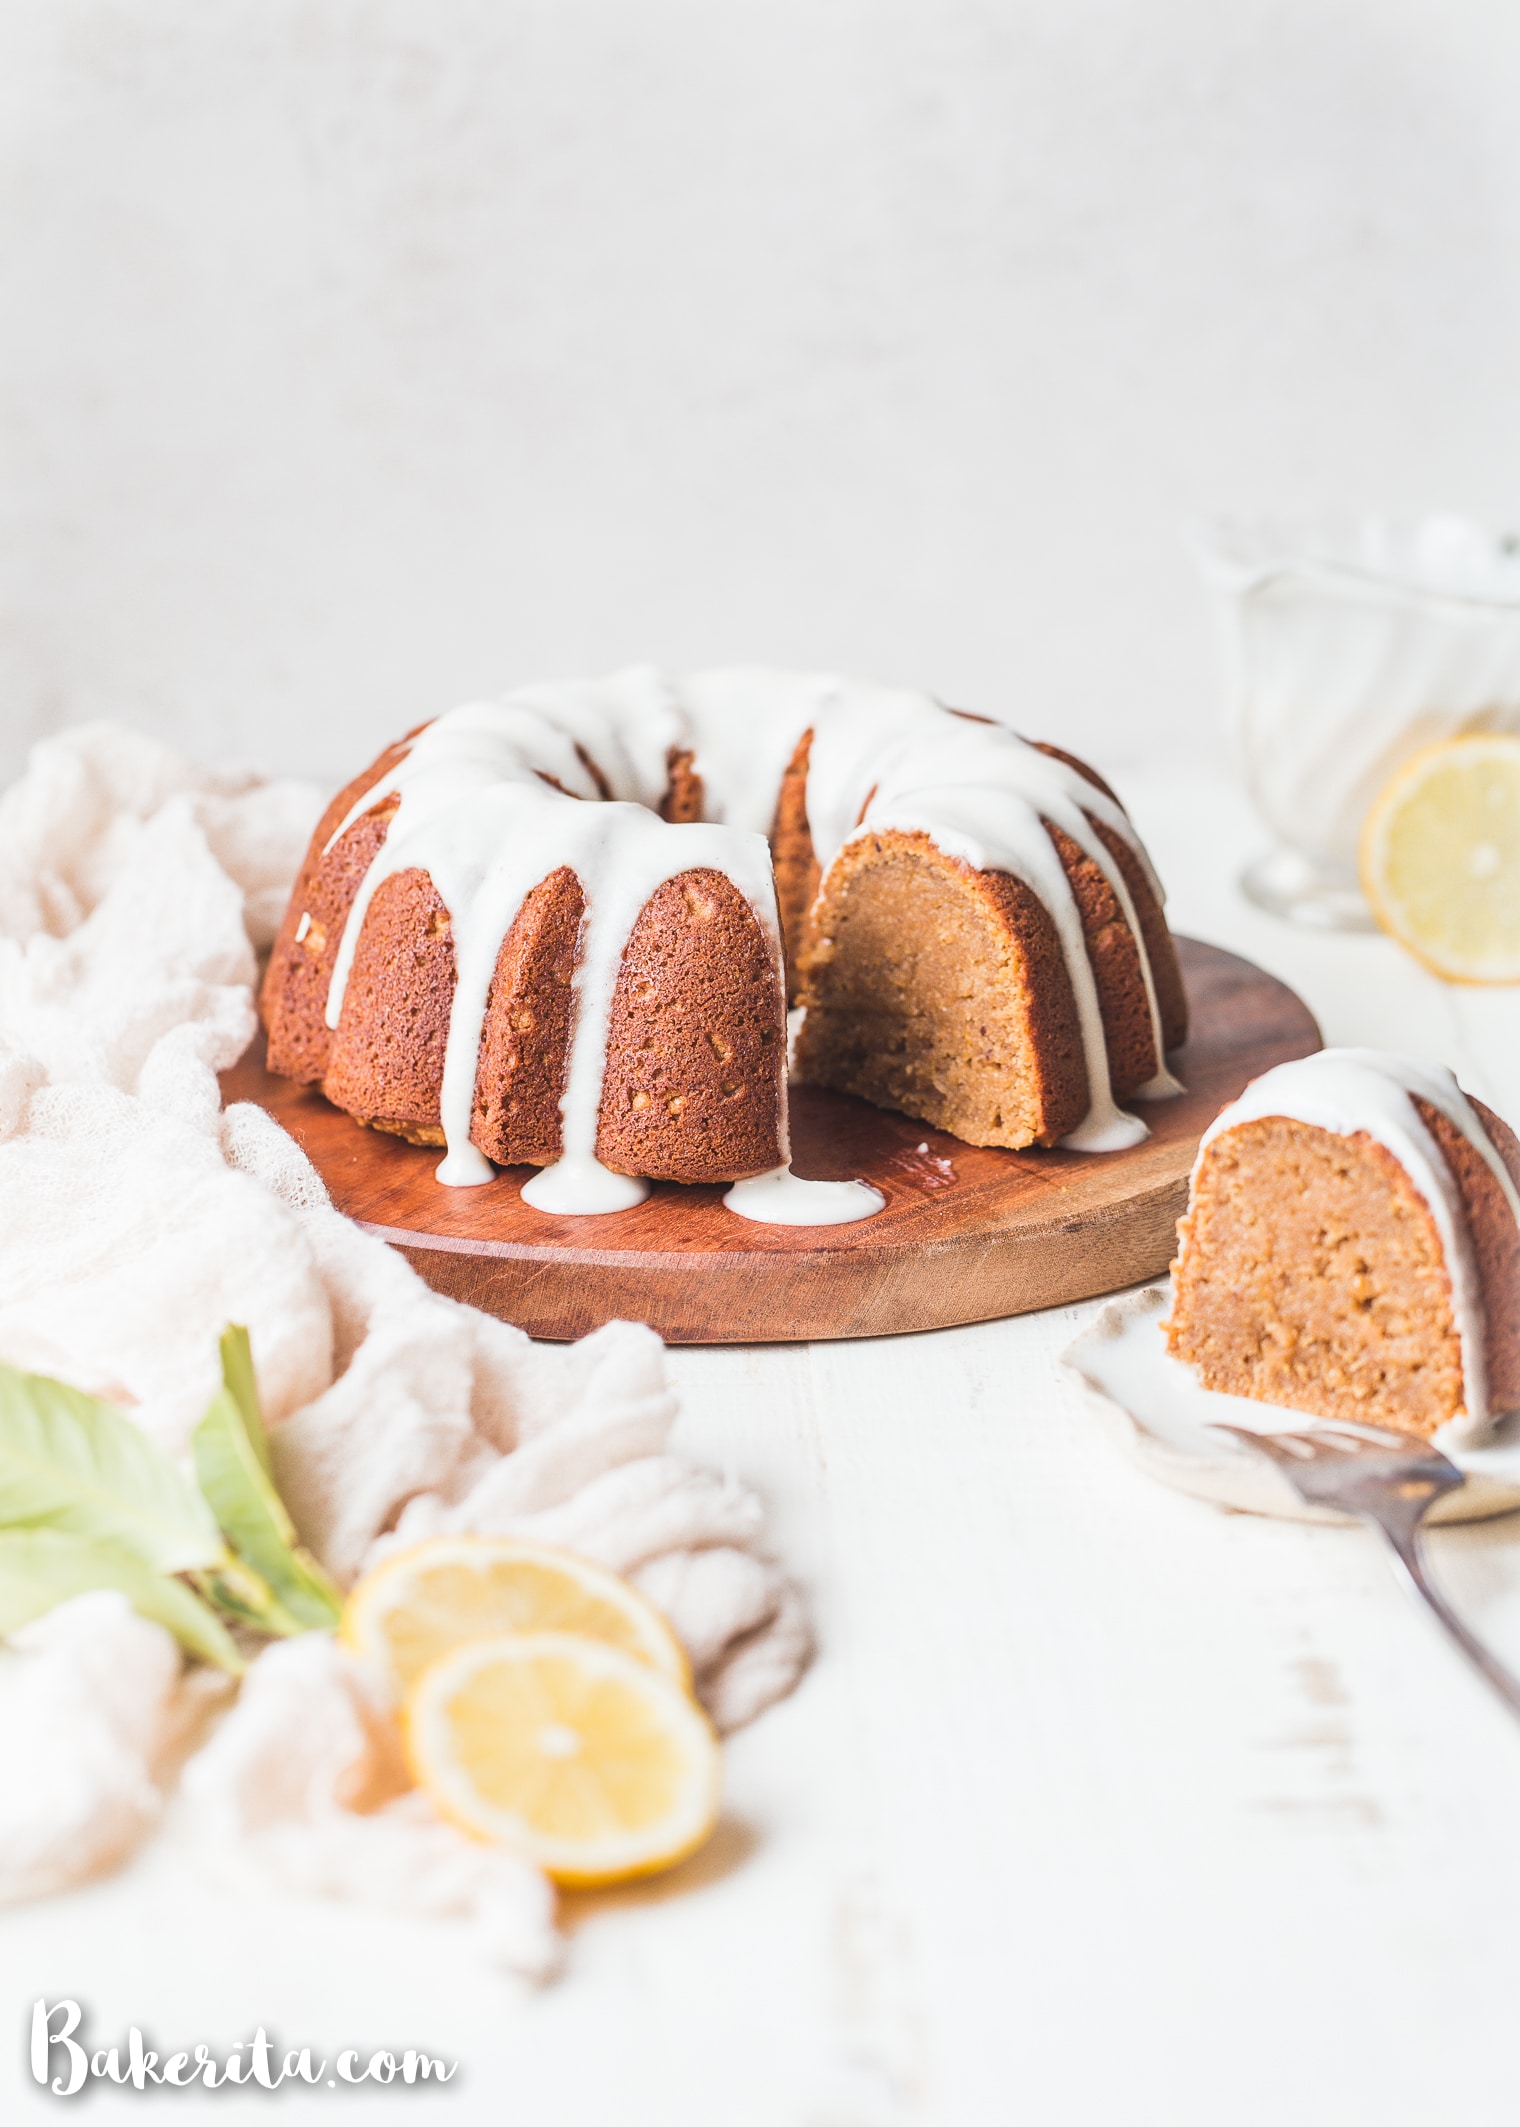 You'll love this easy-to-make Gluten-Free Vegan Lemon Cake! It is simple and elegant with a moist & airy crumb. To top it all off, we drizzle this paleo & refined sugar-free cake with a tangy lemon drizzle. 